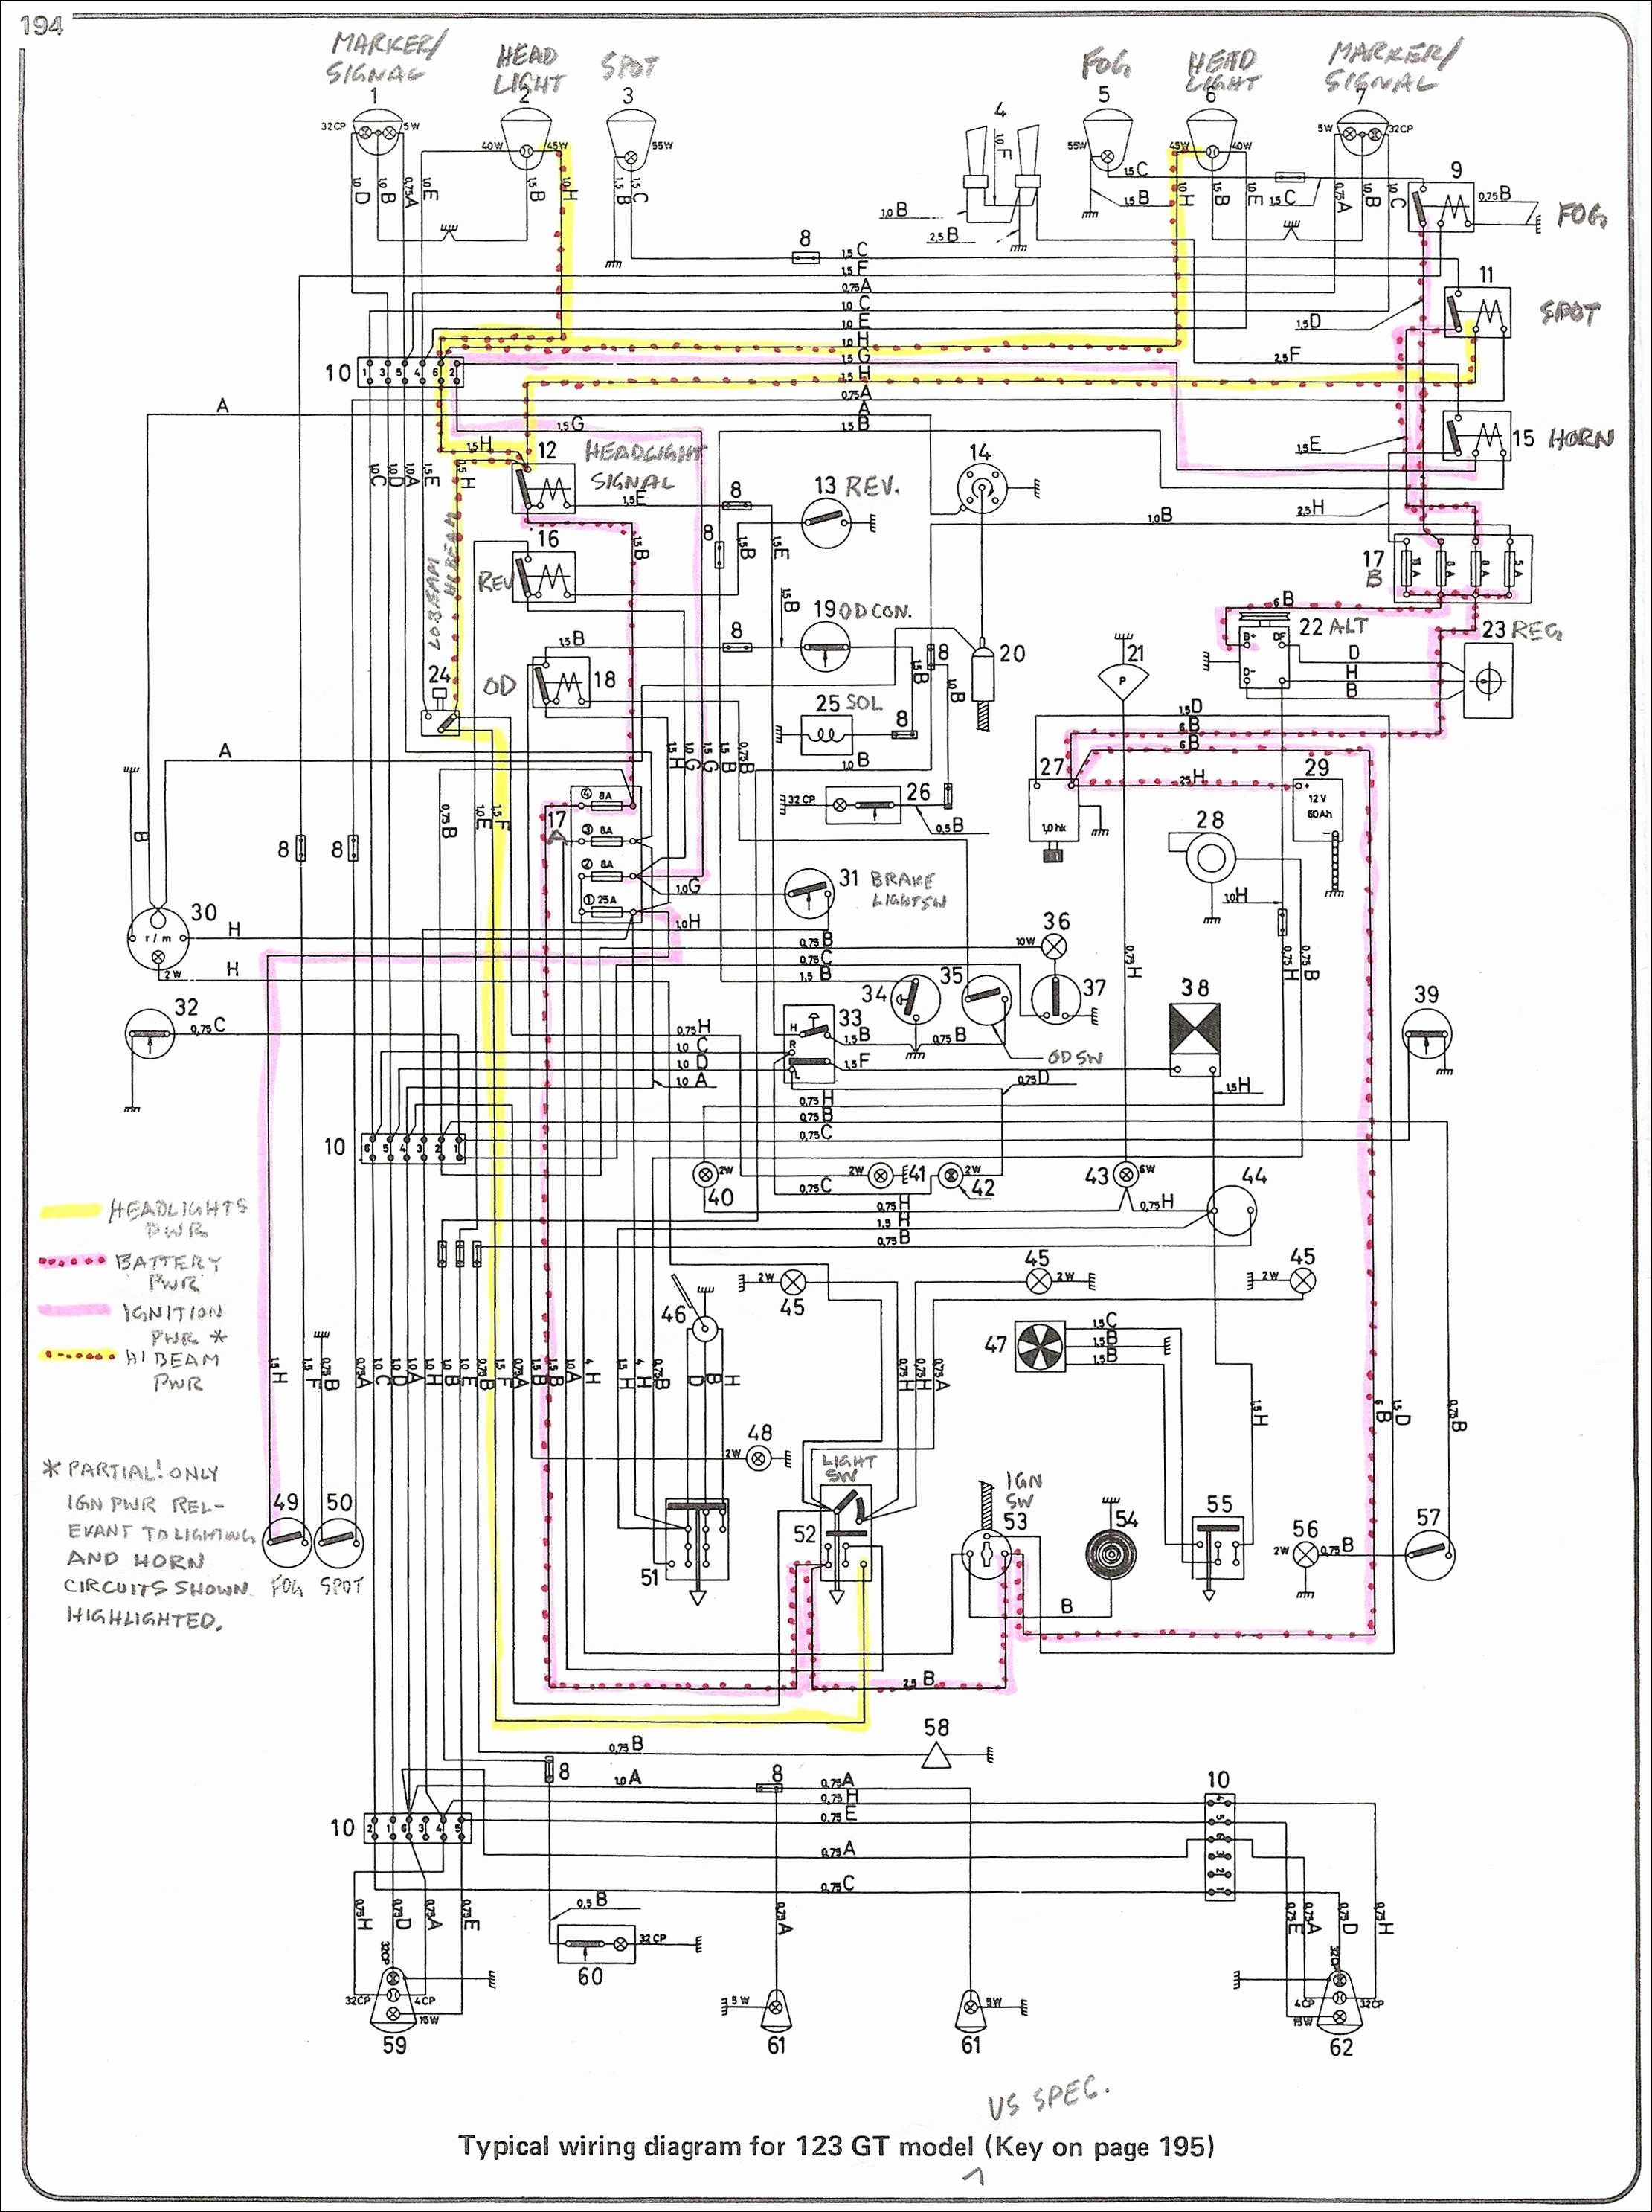 0 10 Volt Dimming Wiring Diagram Inspirational Wiring Diagram Light & Dimmer Switch Circuit